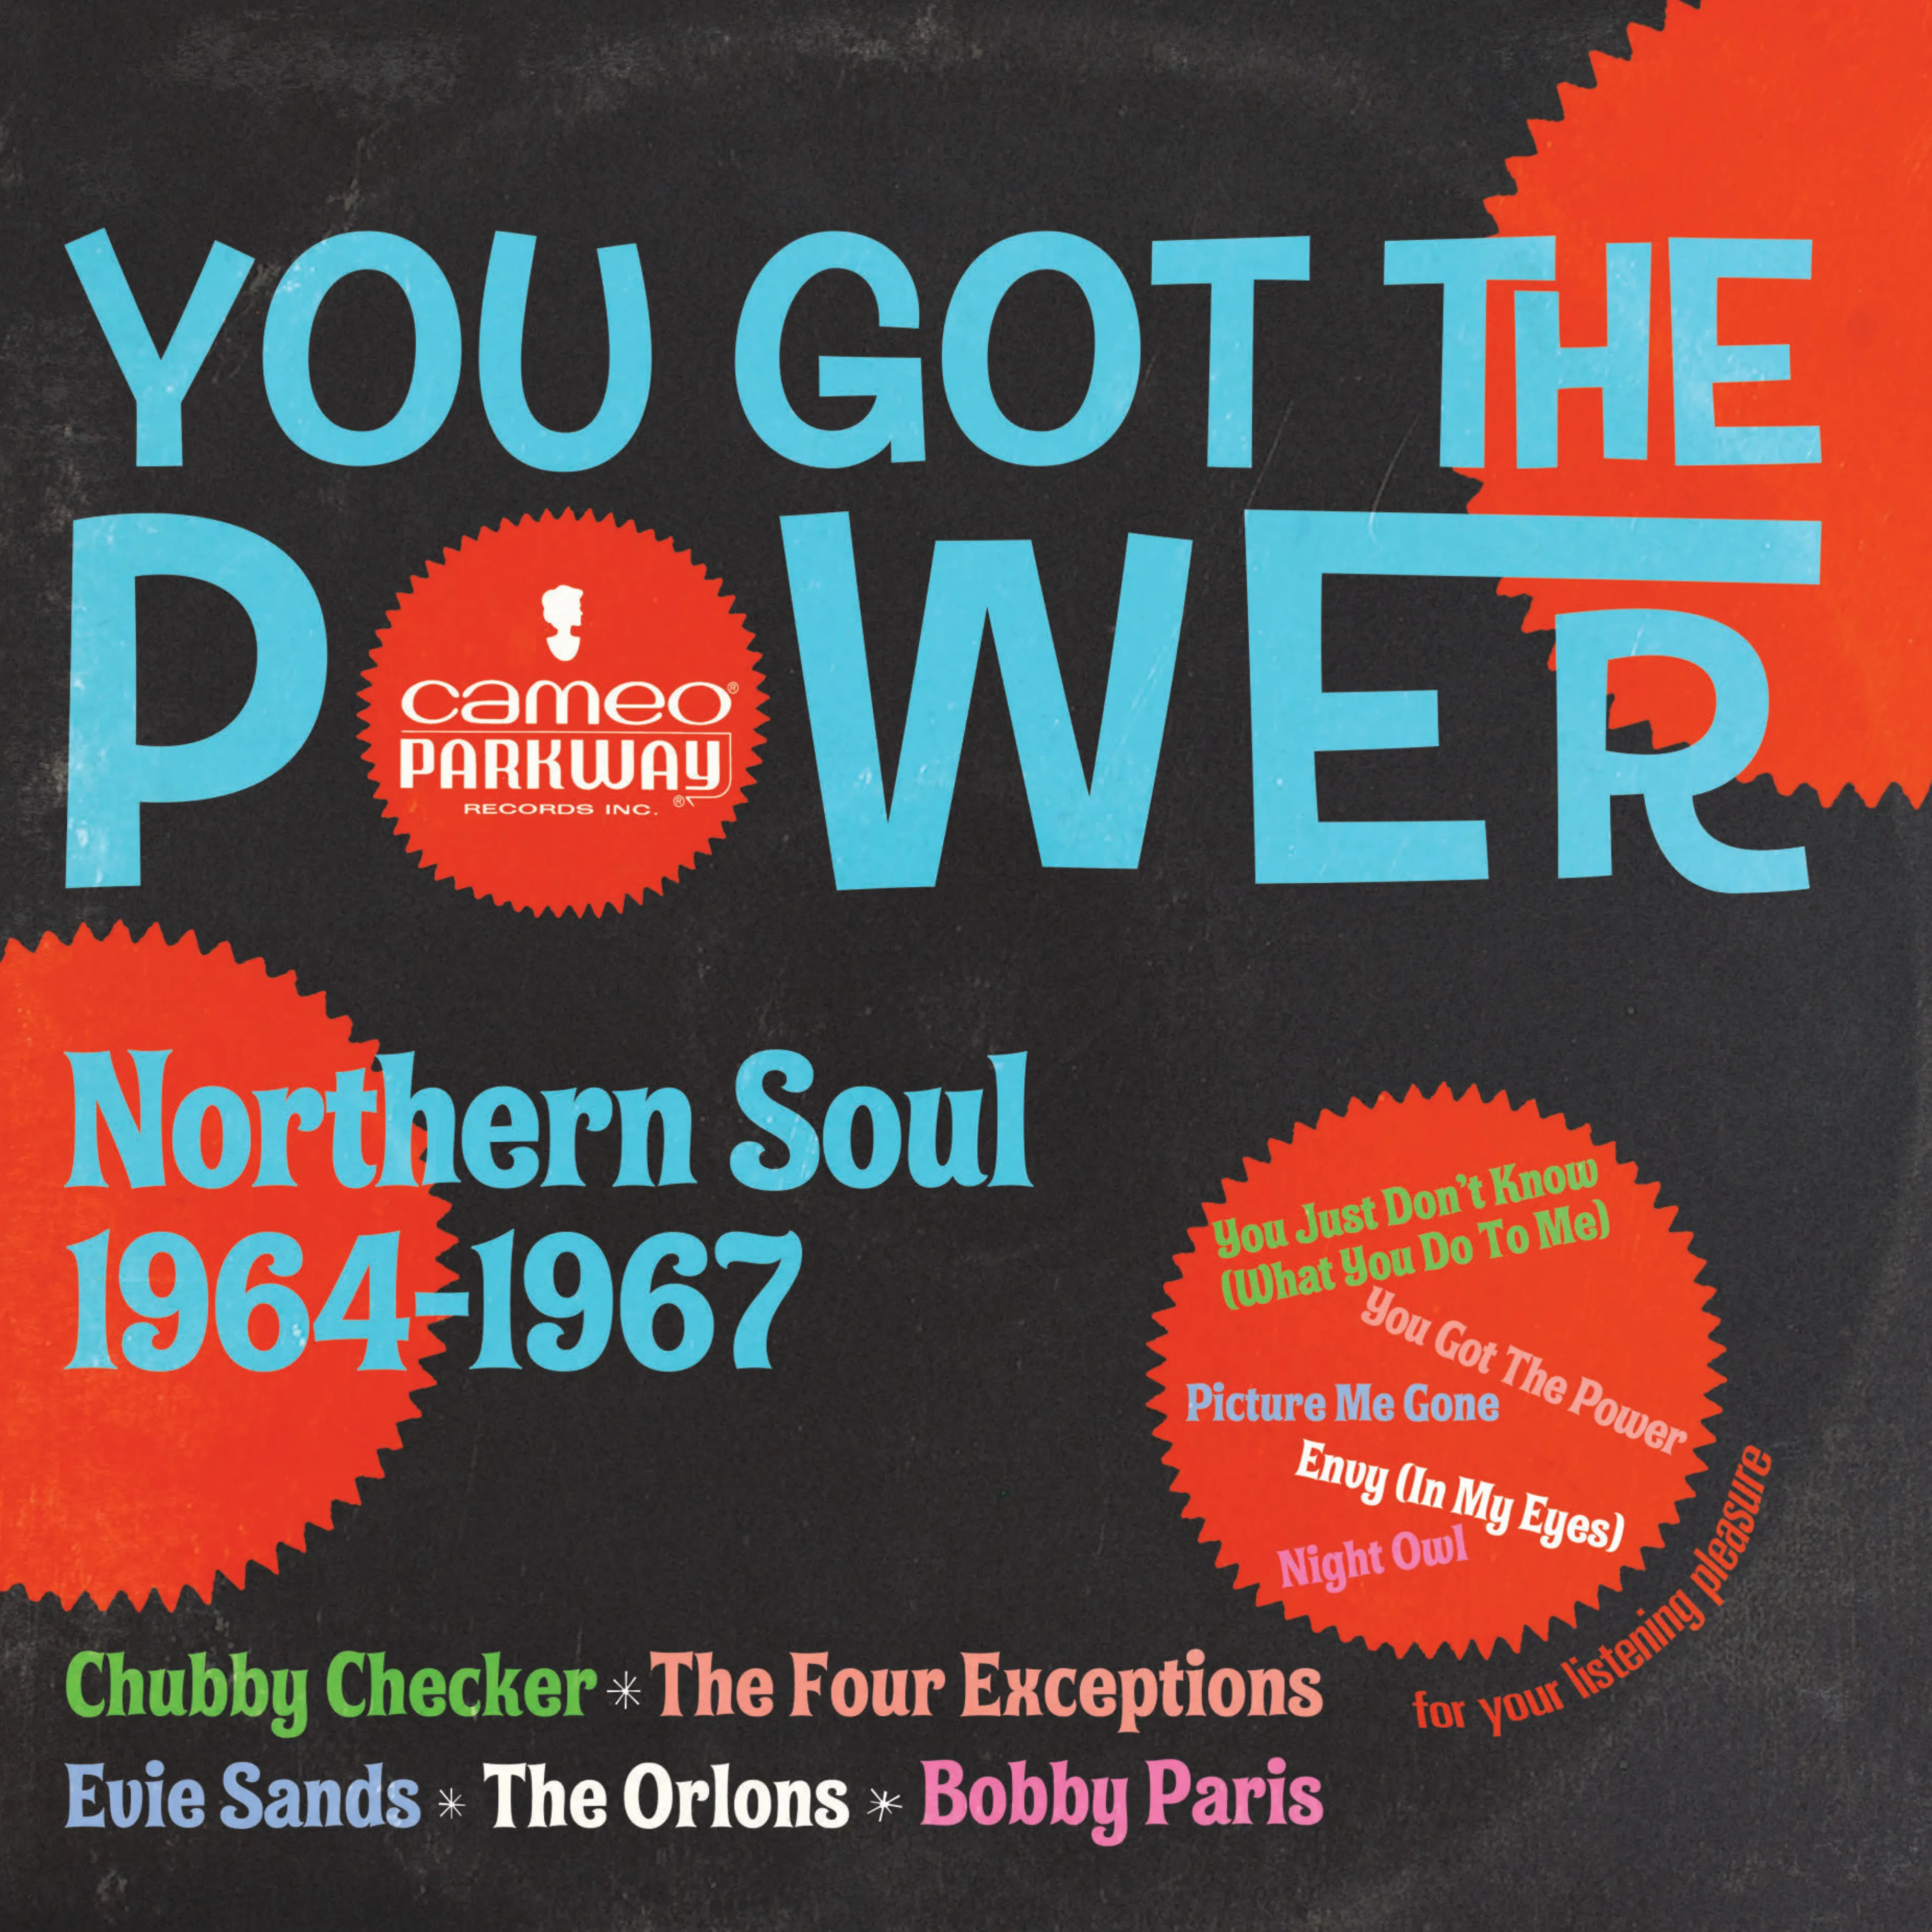 Various Artists - You Got The Power: Cameo Parkway Northern Soul 1964-1967 (U.K. Collection) [RSD 2022] []